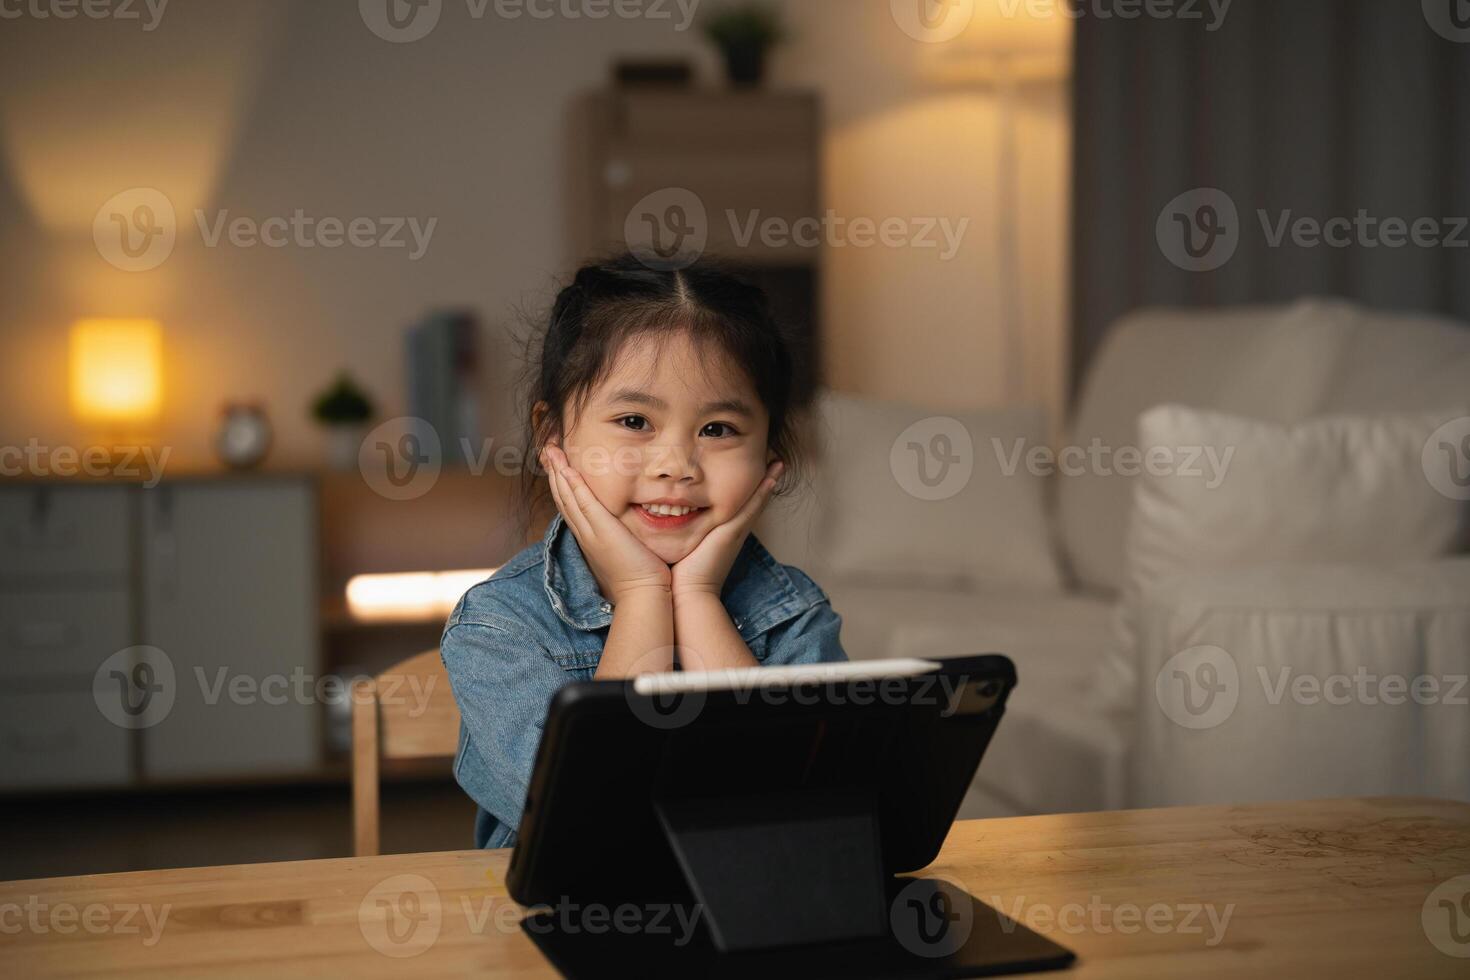 Asian child girl looking using and touch tablet display screen. Baby smiling funny time to use tablet. Too much screen time. Cute girl watching videos while tv, Internet addiction concept. photo